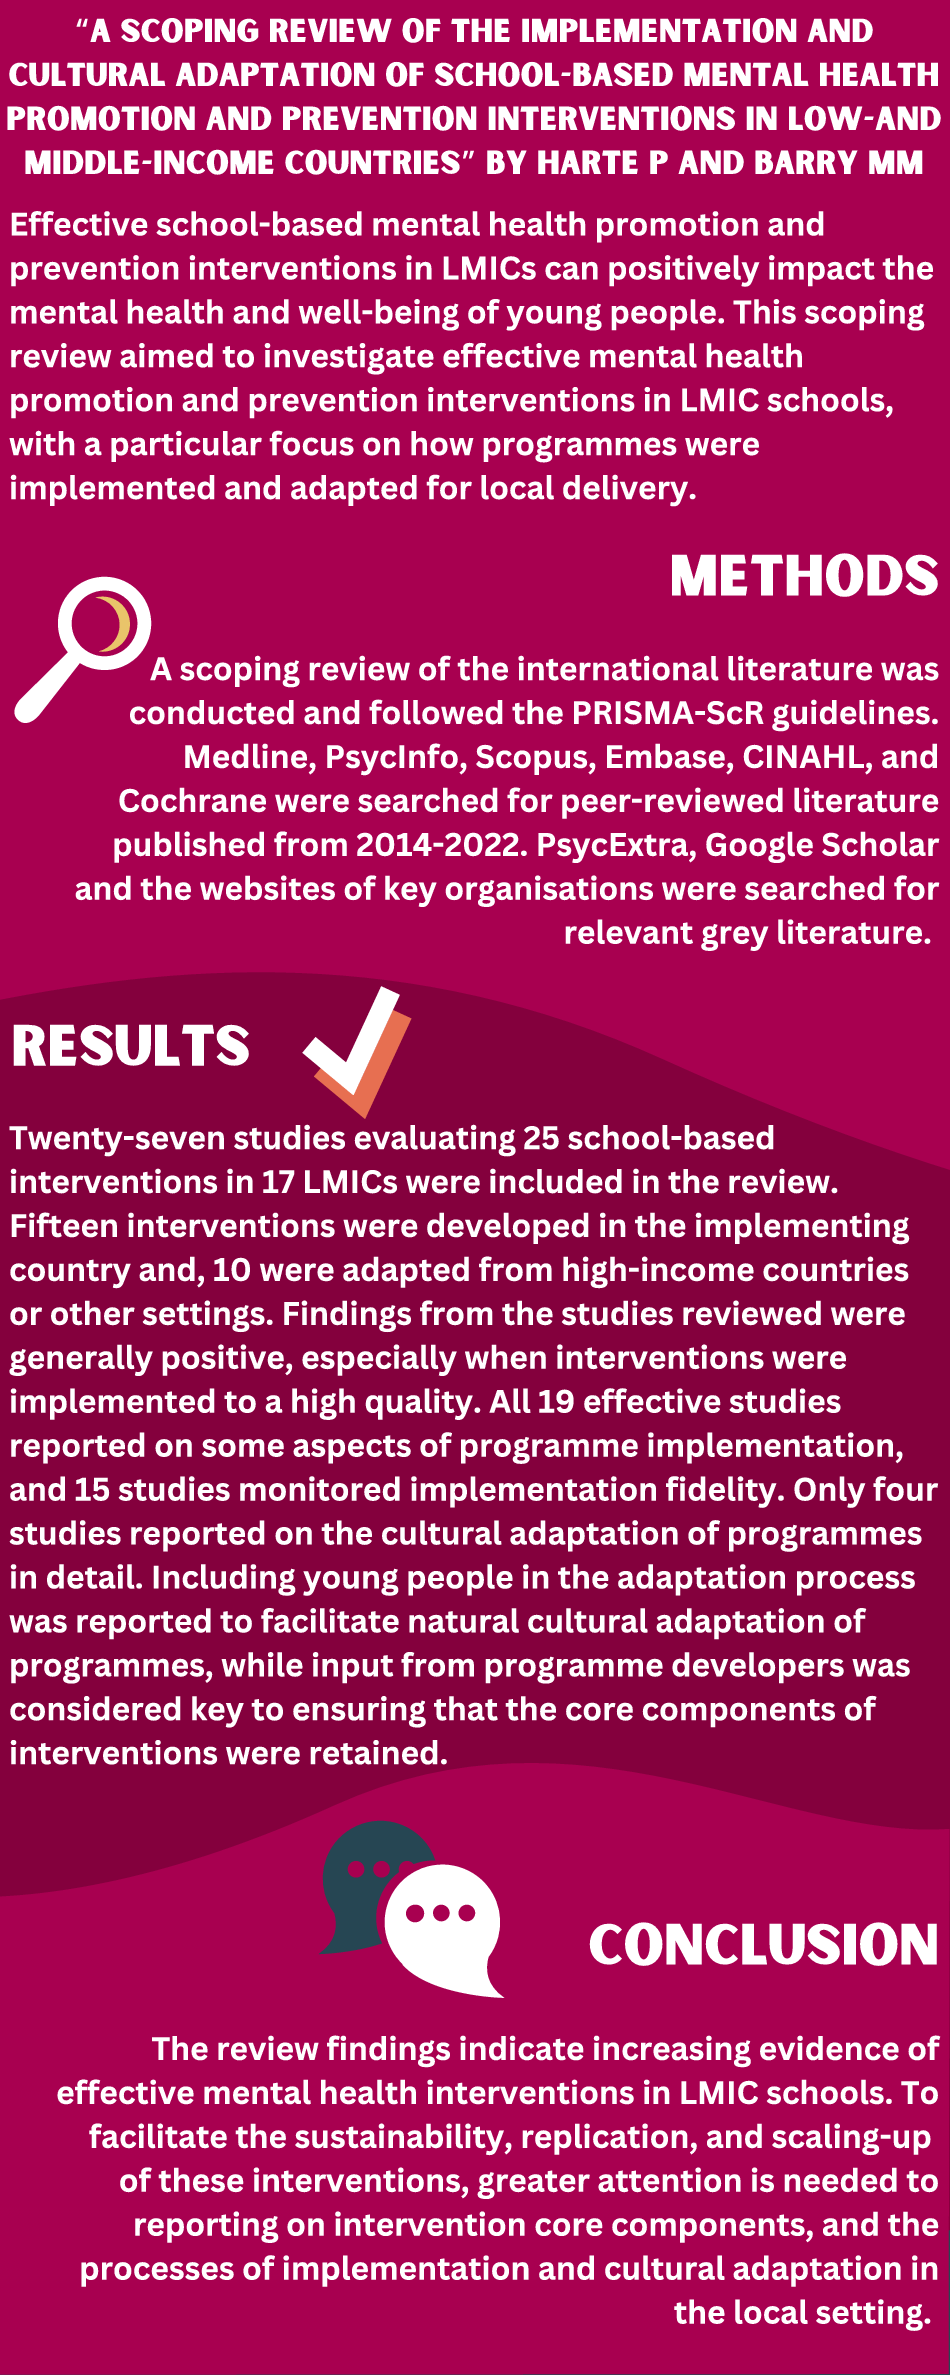 graphical abstract for A scoping review of the implementation and cultural adaptation of school-based mental health promotion and prevention interventions in low-and middle-income countries - open in full screen